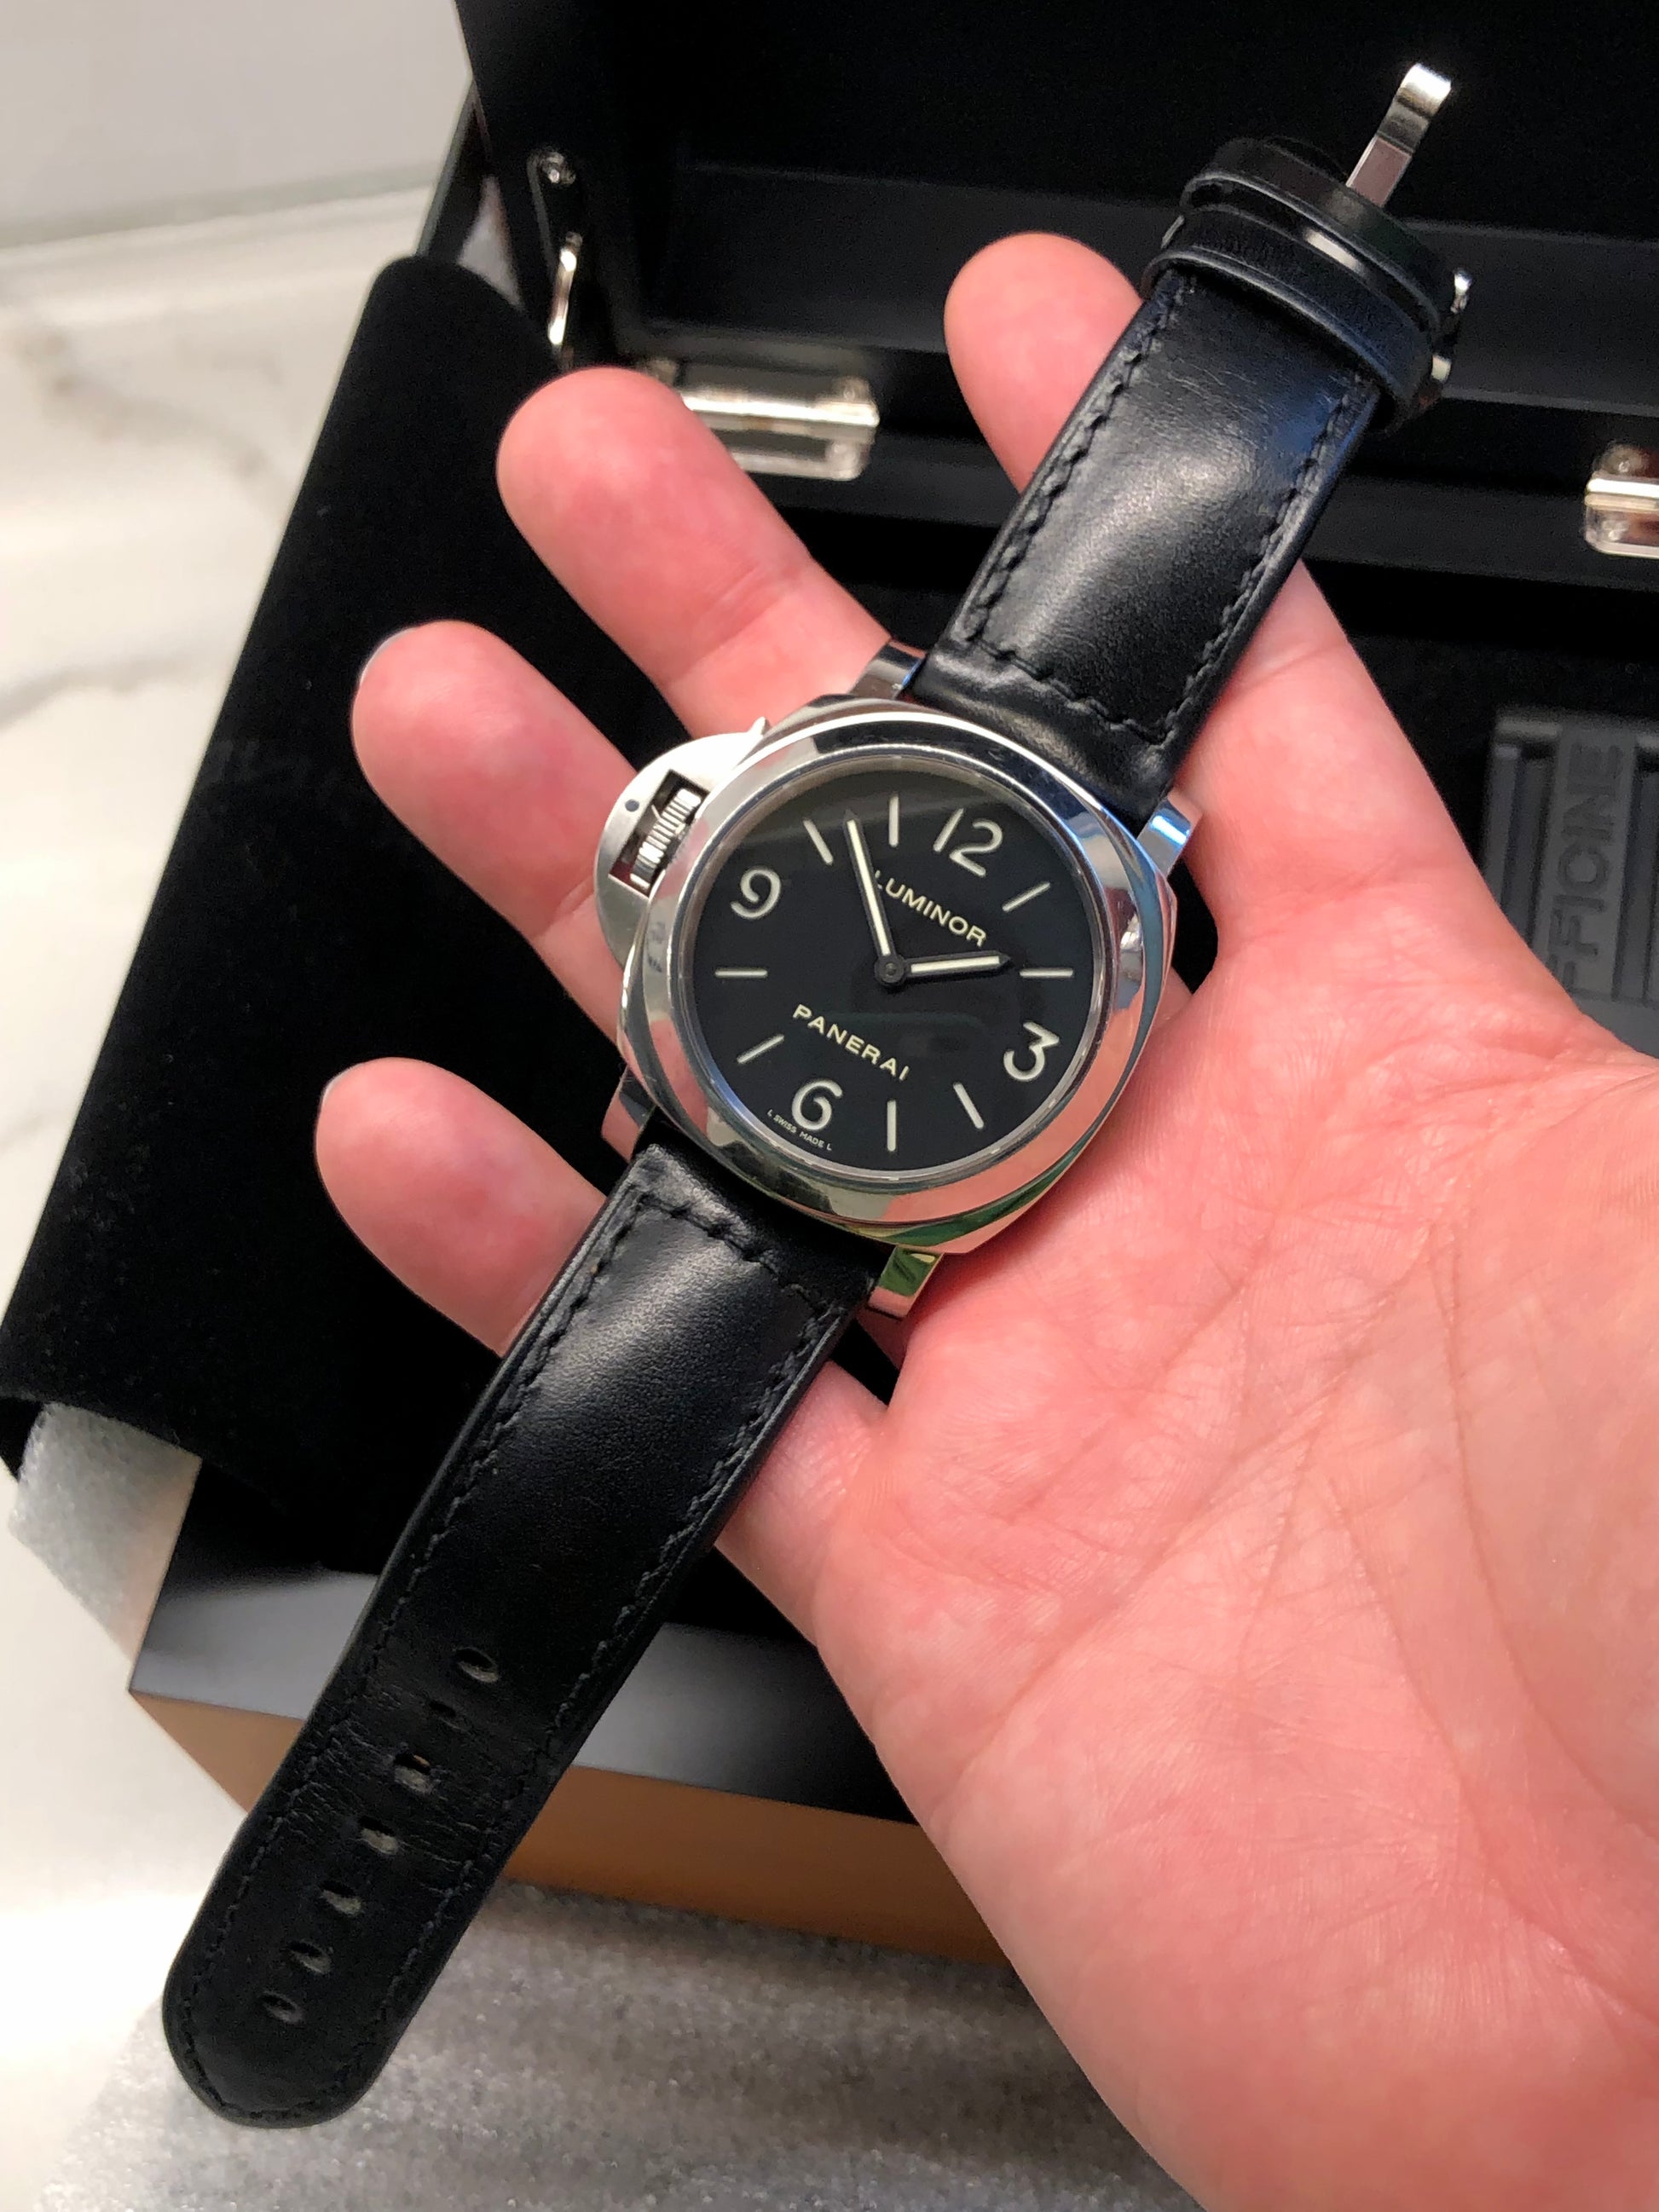 Panerai Luminor PAM 219 Base 44mm Steel Left Hand Sandwich Dial Manual Wind Wristwatch with Box and Papers - Hashtag Watch Company